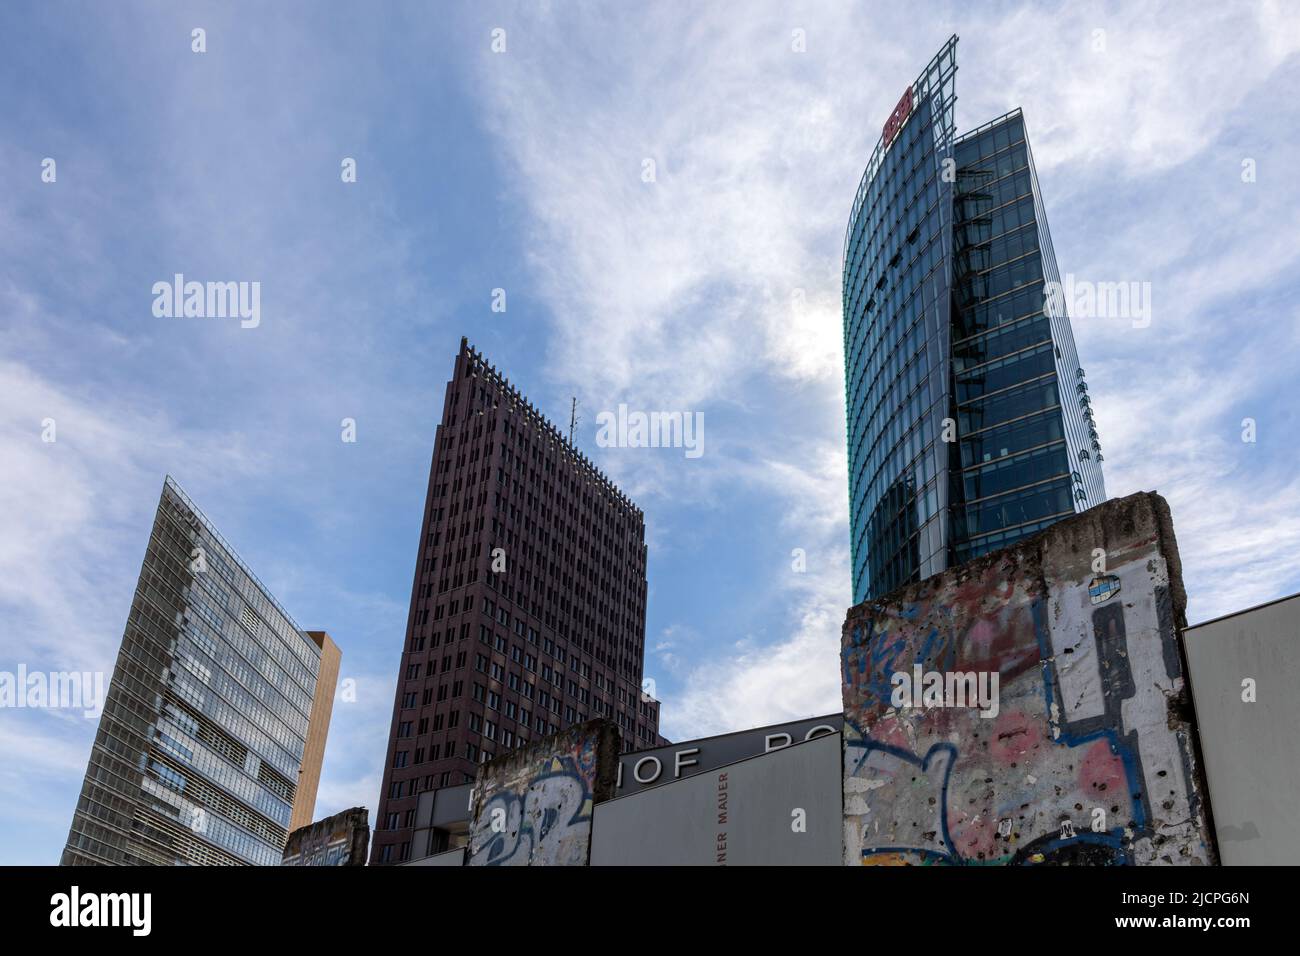 Original sections of Berlin Wall, with new high rise developments in background, at Potsdamer Platz, Berlin, Germany Stock Photo